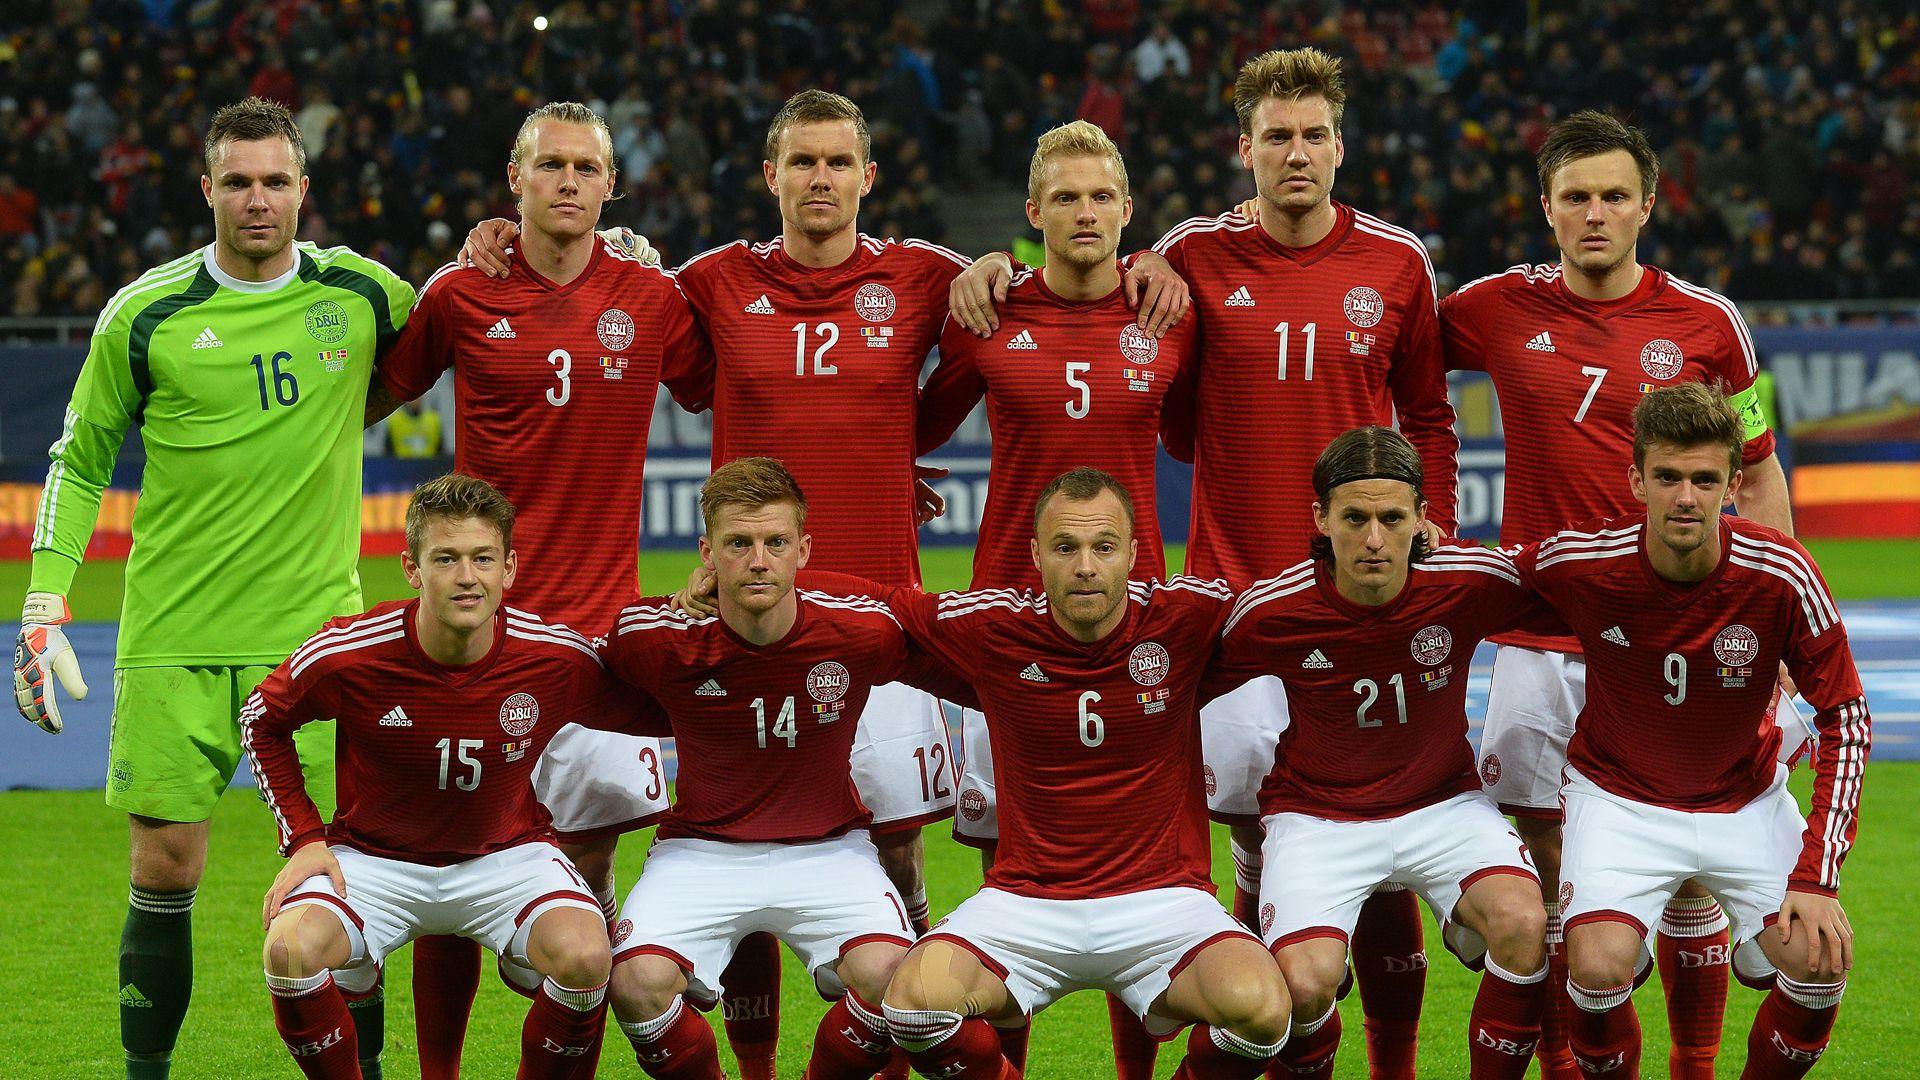 The Danish Football Association agreed to more pay negotiations